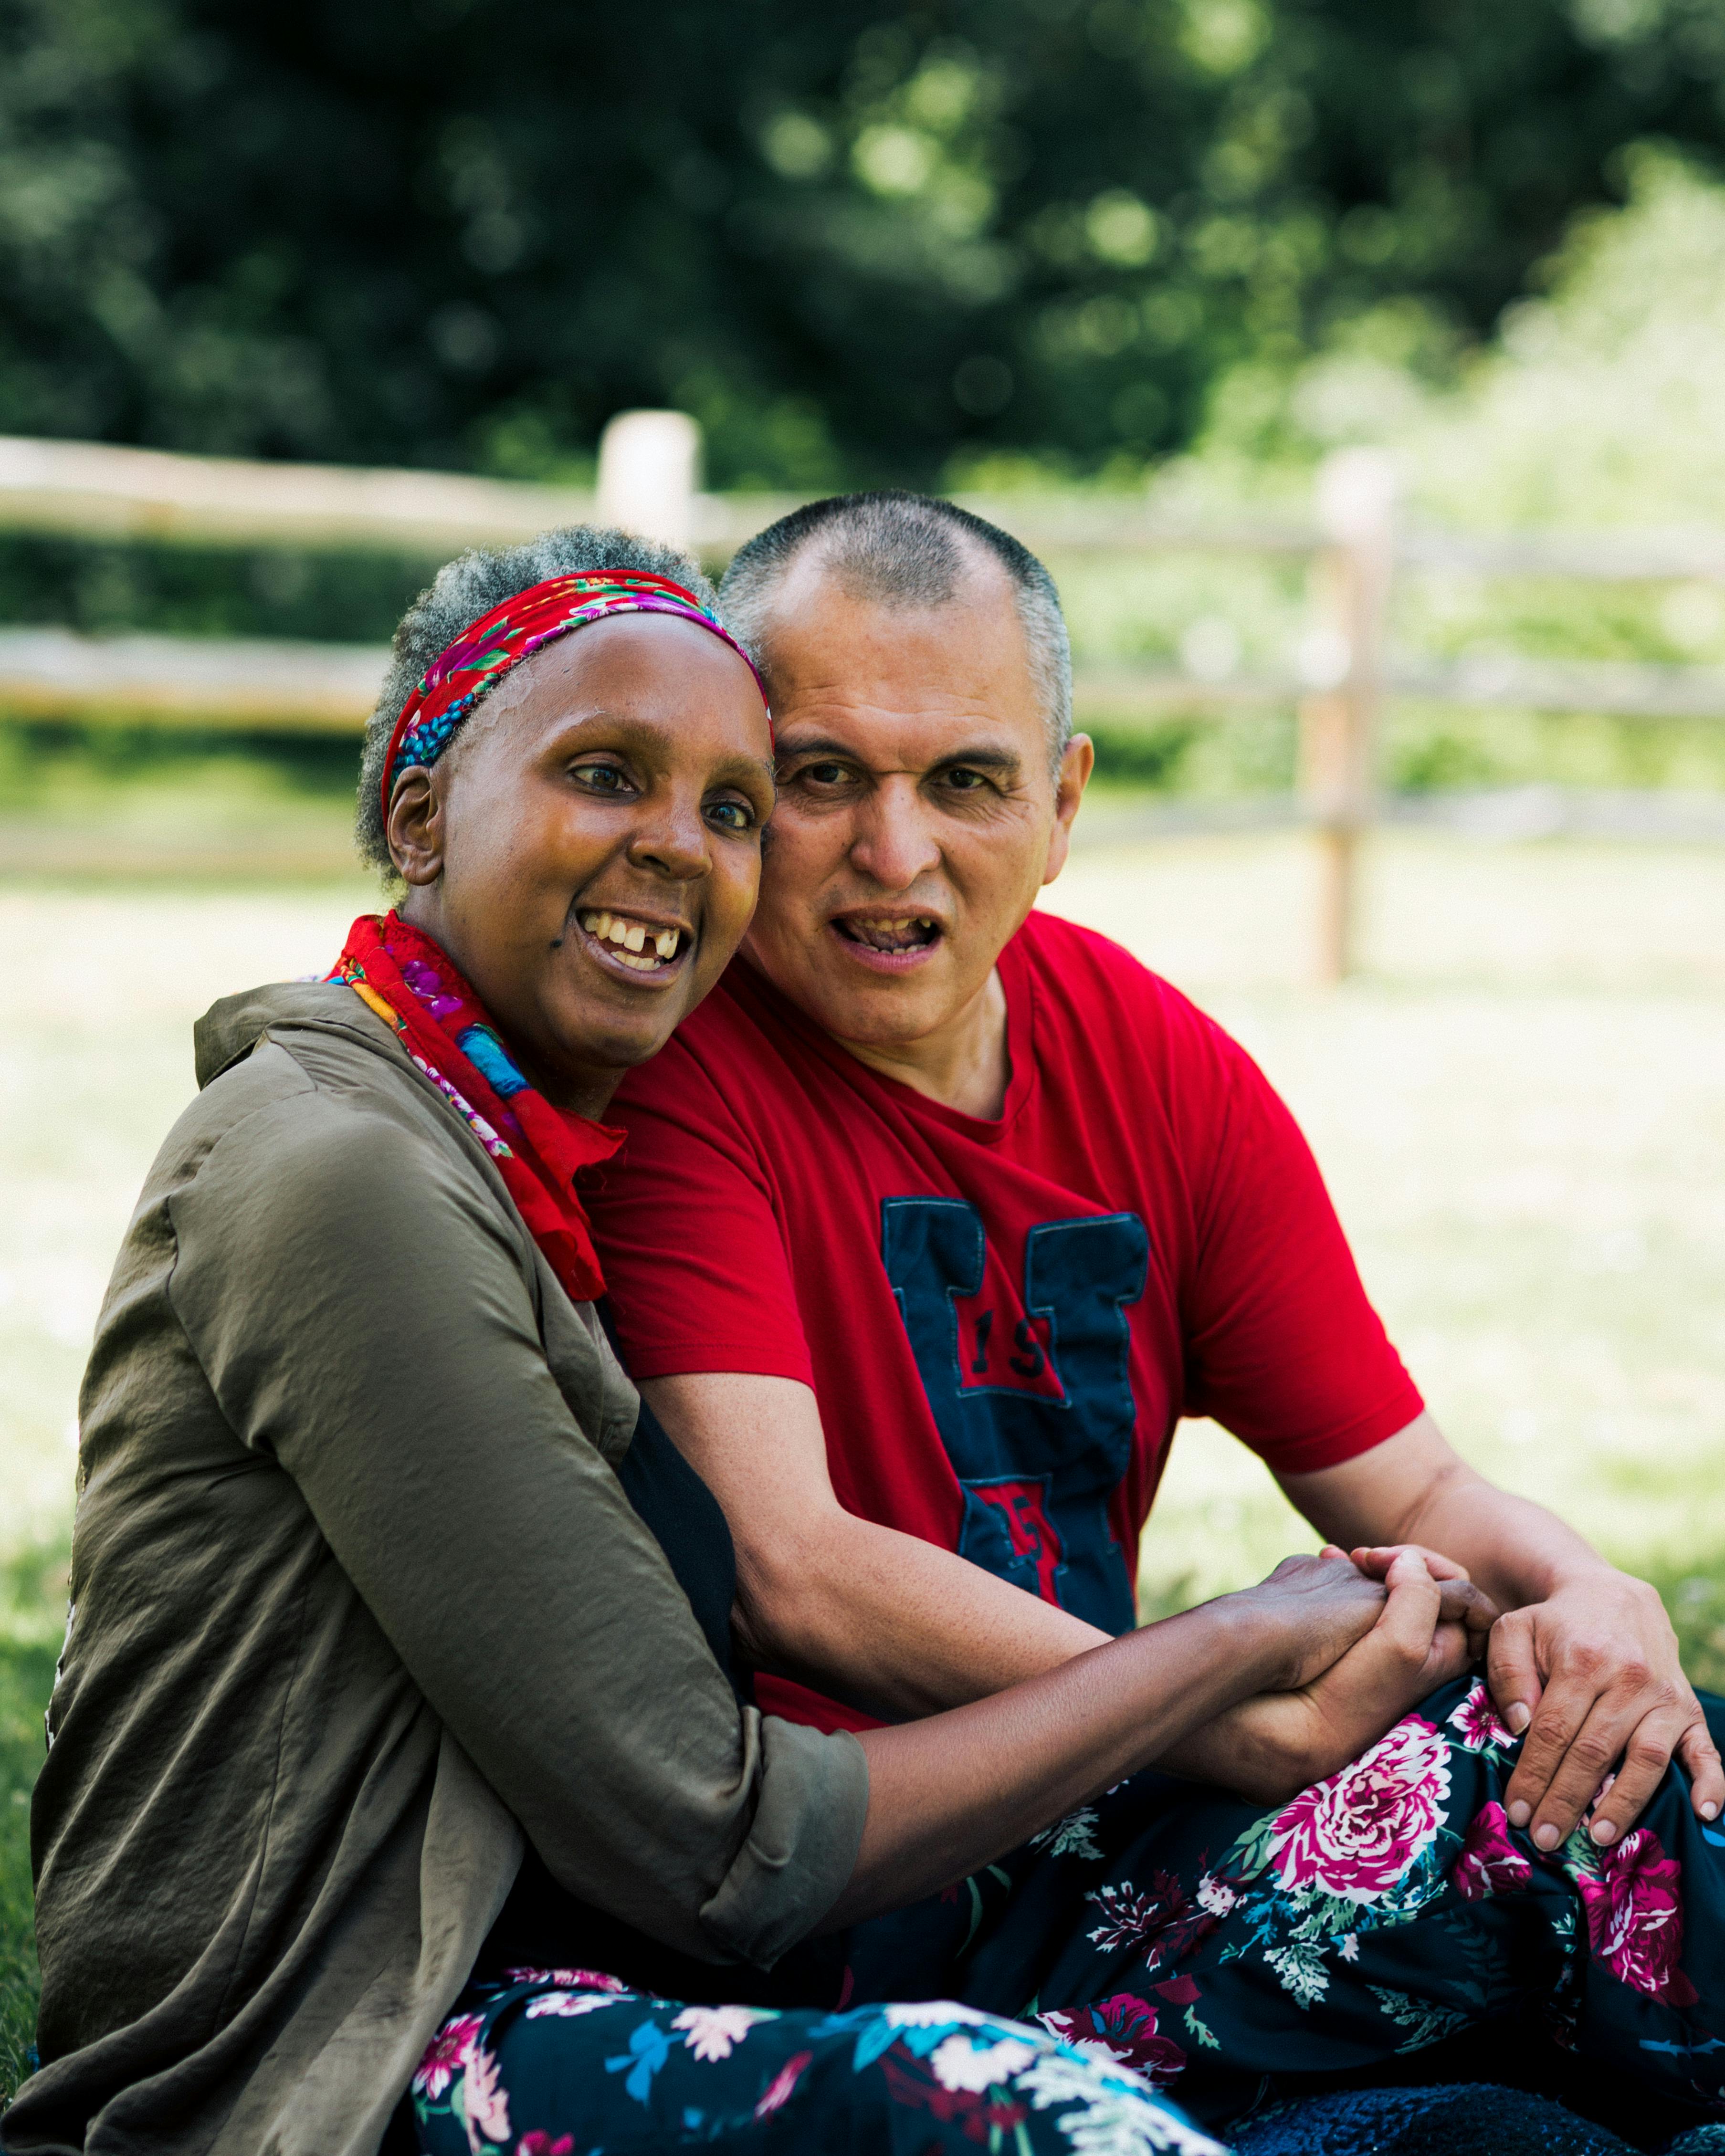 A disabled man and woman sitting on a blanket in the grass smiling,  holding hands and leaning their heads to touch together. The Black woman wears a read patterend headband,  dark green jacket and flower-printed skirt. The man wears a red shirt with the letter H printed in dark blue.